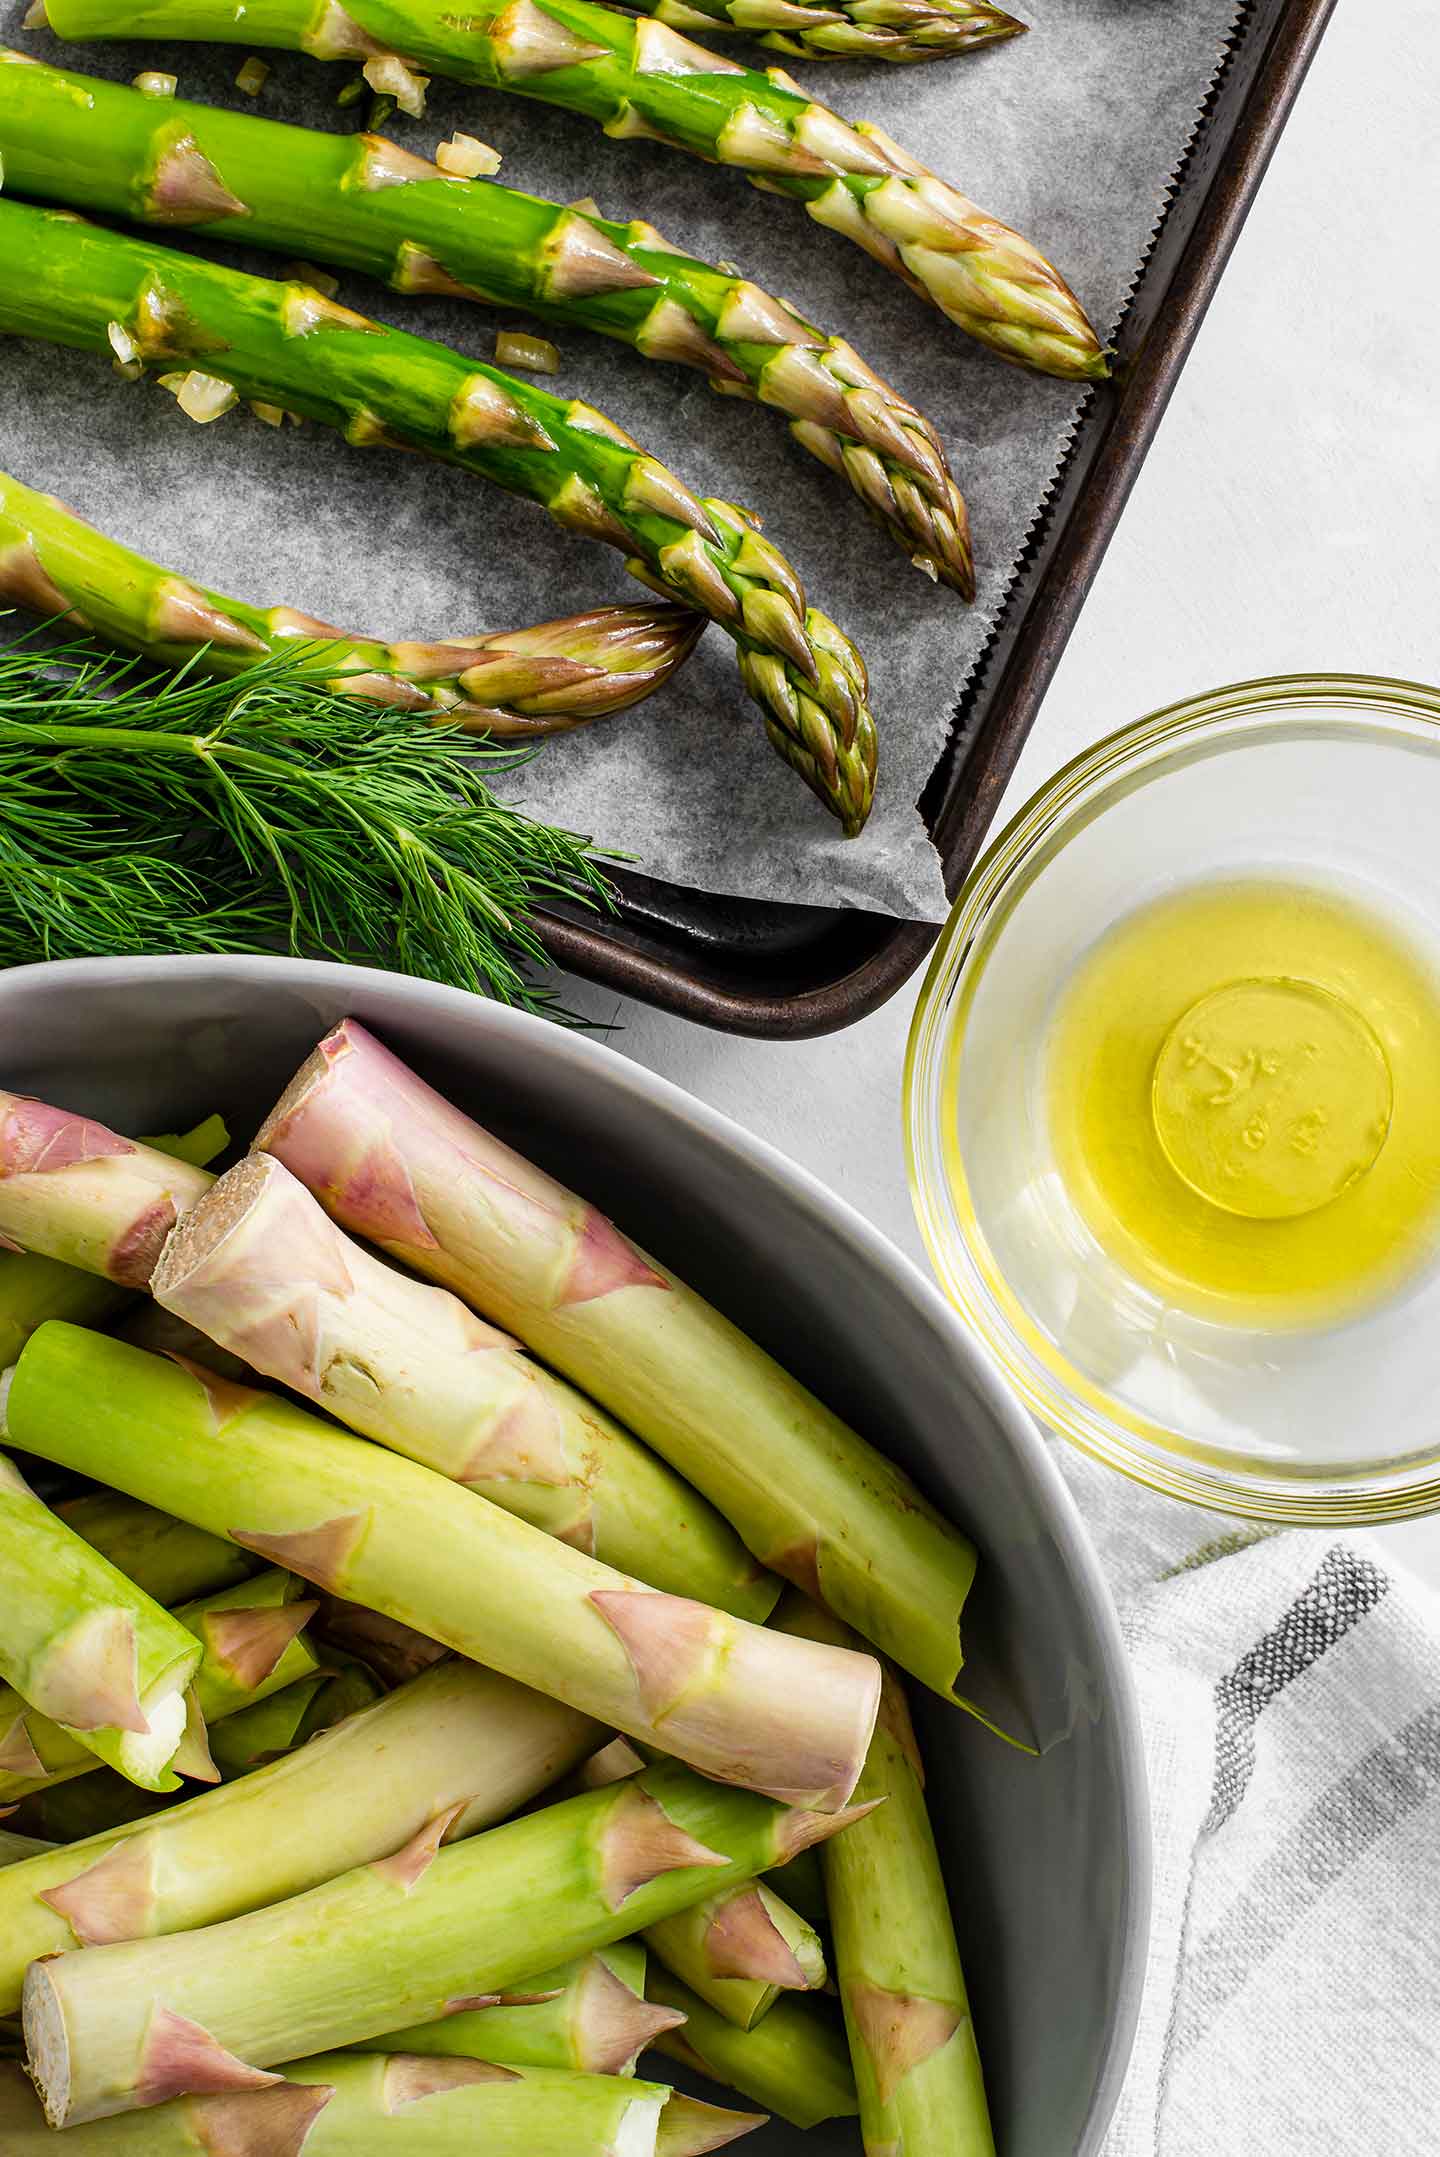 Top down view of asparagus spears on a lined baking tray with the tough ends in a separate bowl. A small dish of olive oil stands beside the baking tray.